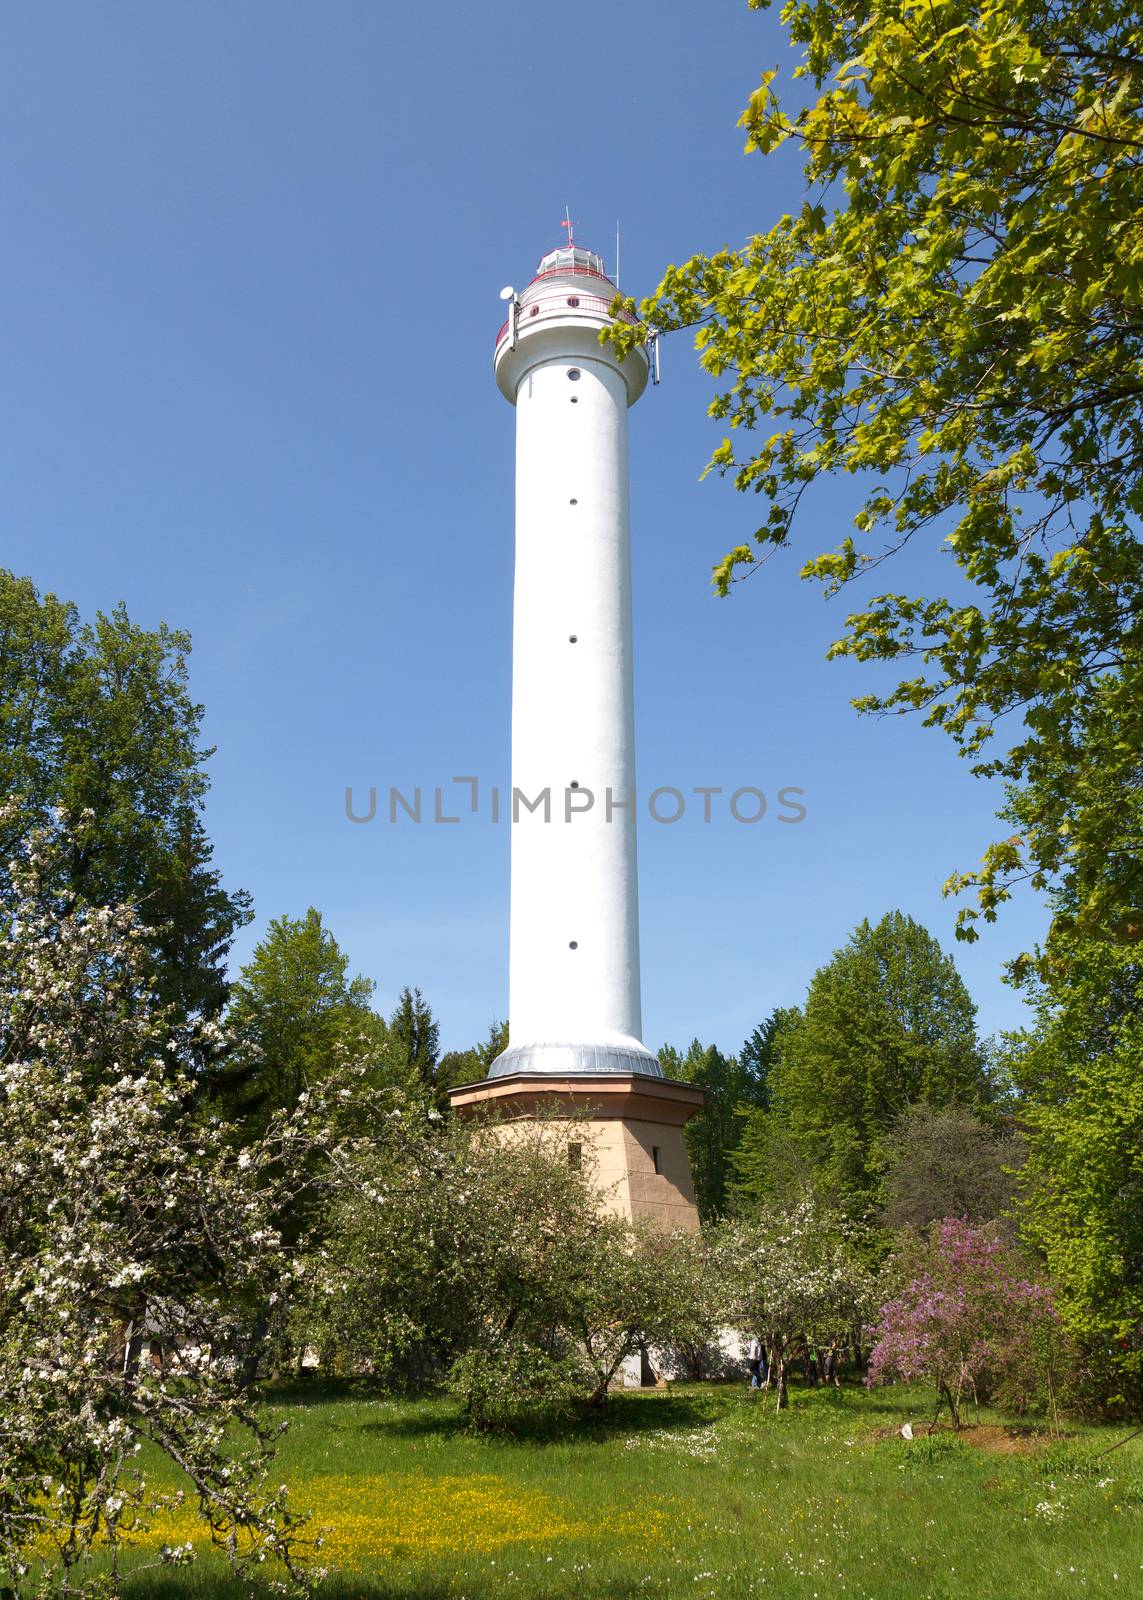 Mikelbaka lighthouse is 65 metres high making it the tallest in the Baltic States. It is currently the 14th highest lighthouse in the world.